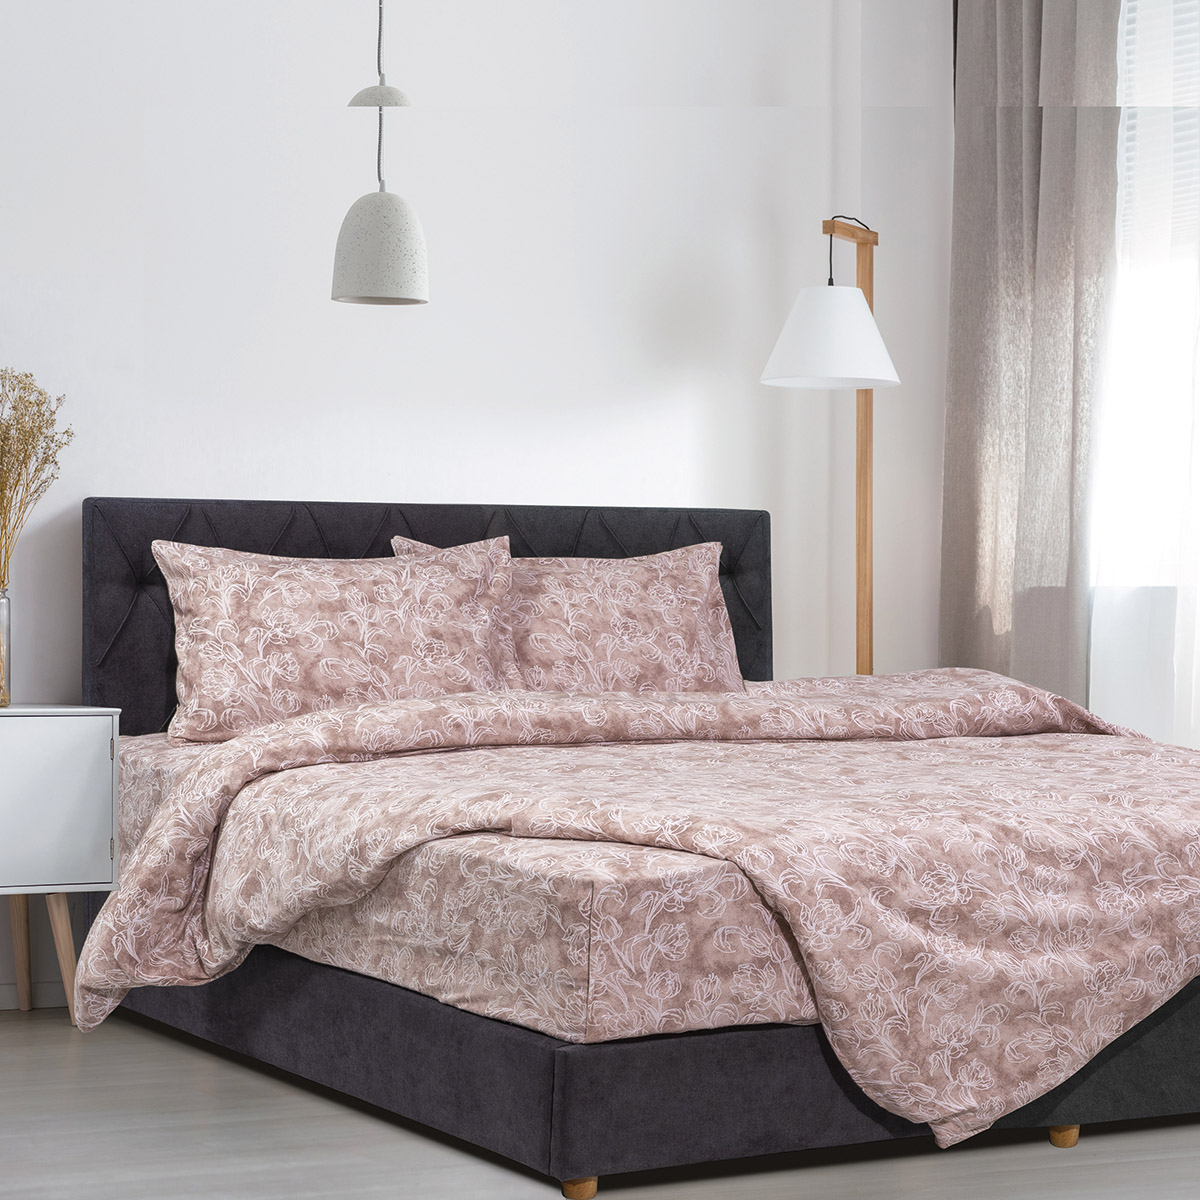 Fluffy,Grey,Blanket,On,Wooden,Bed,With,Pink,Bedding